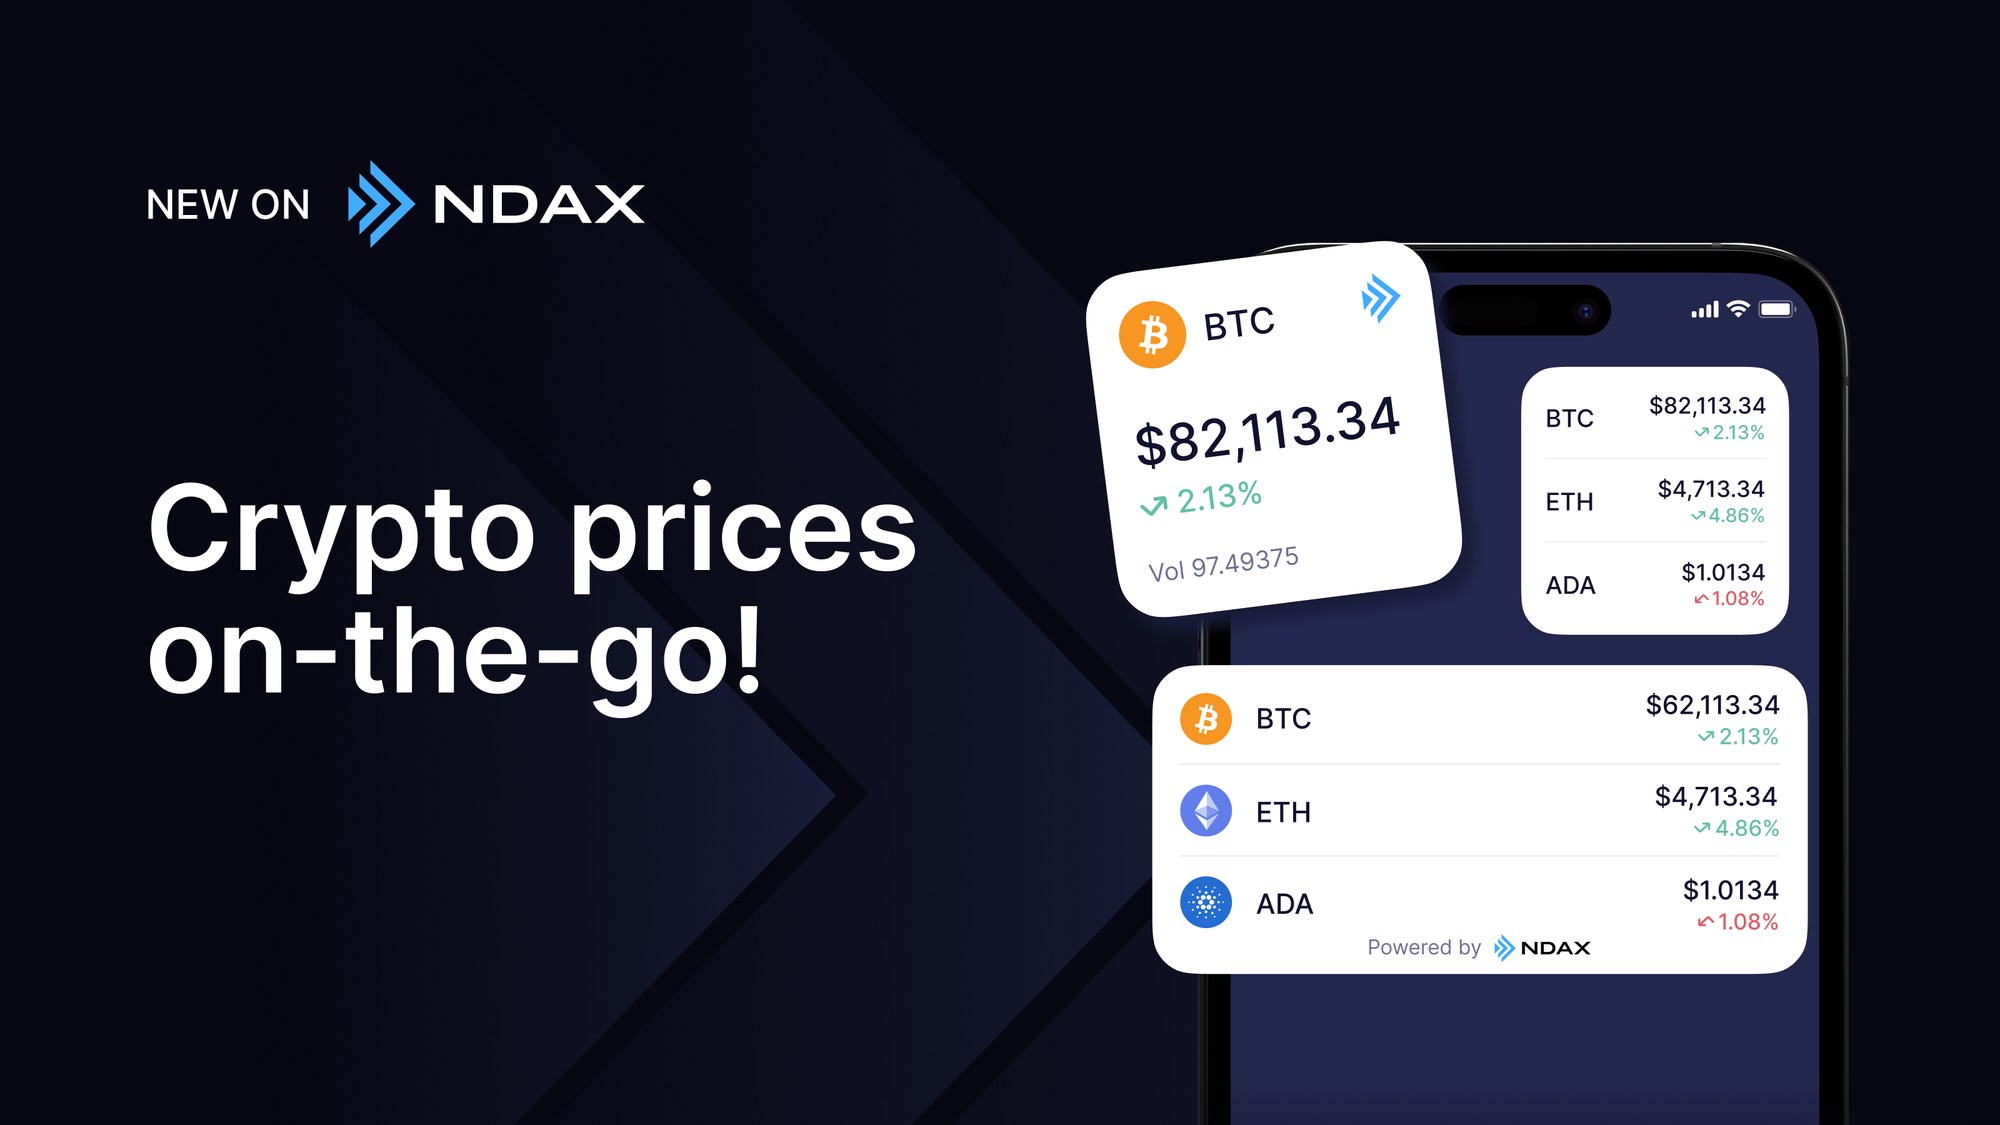 Introducing the Mobile App Price Widget: Track crypto prices on-the-go!